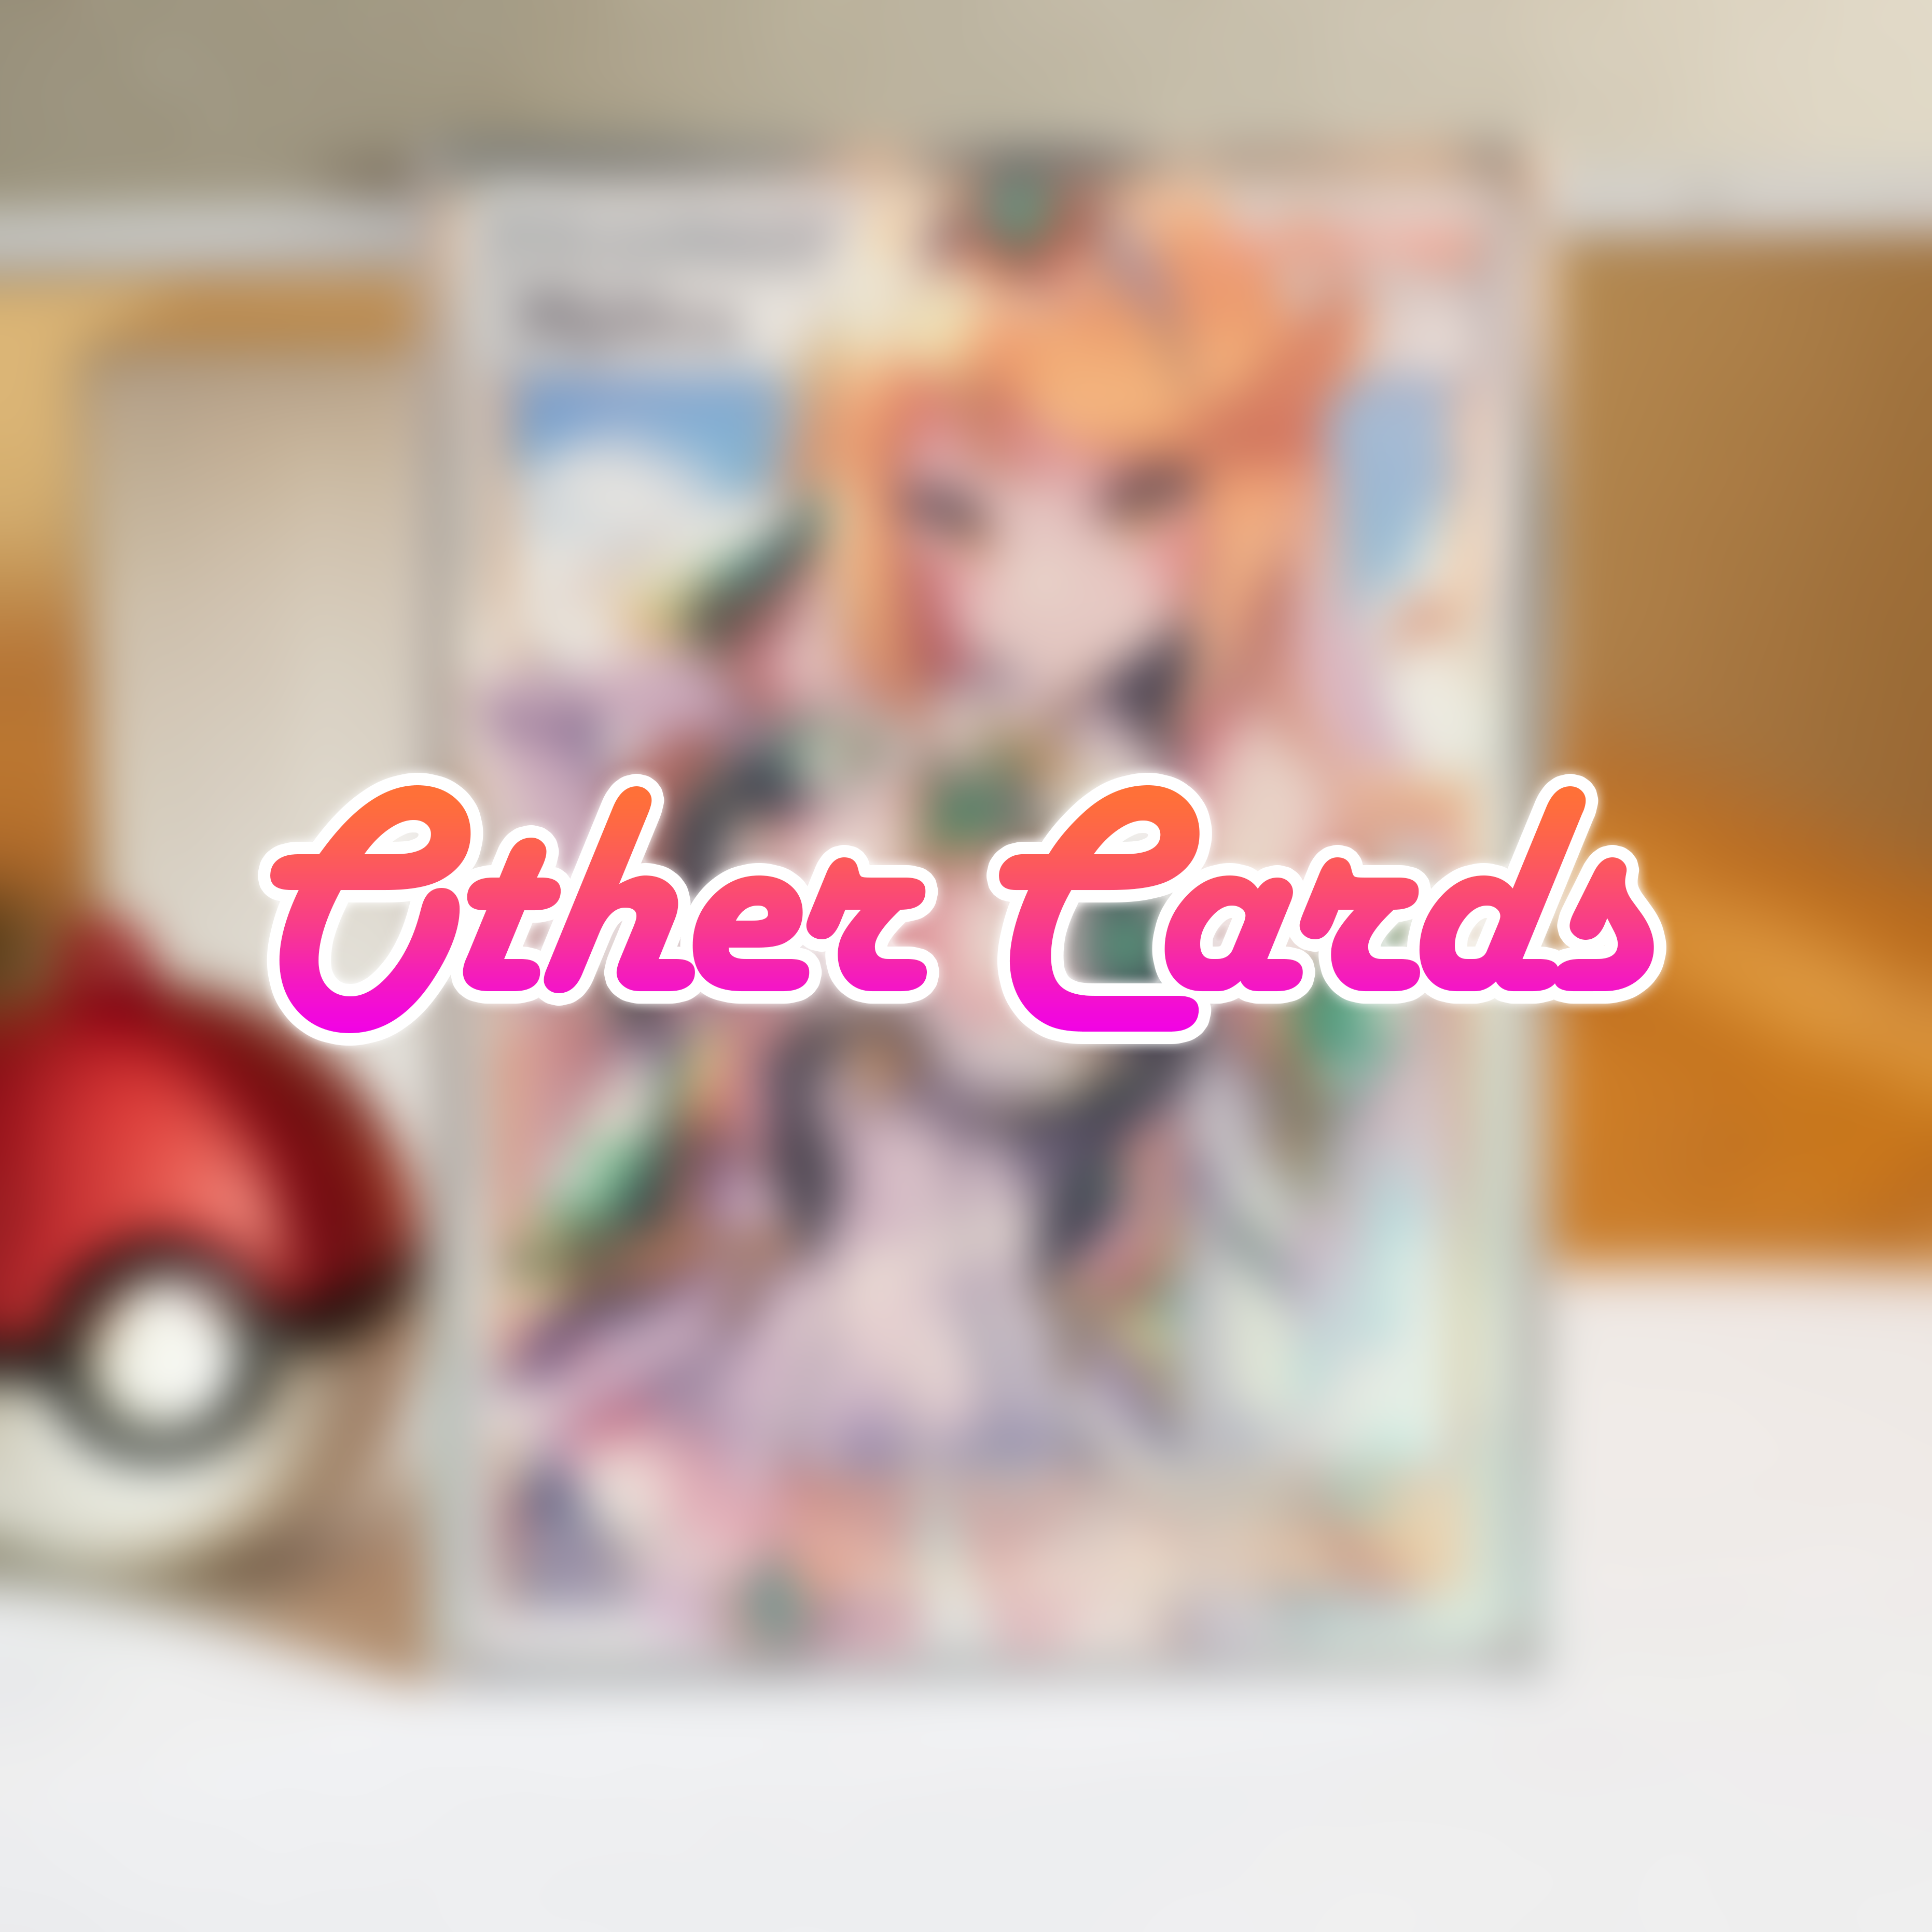 Other Cards